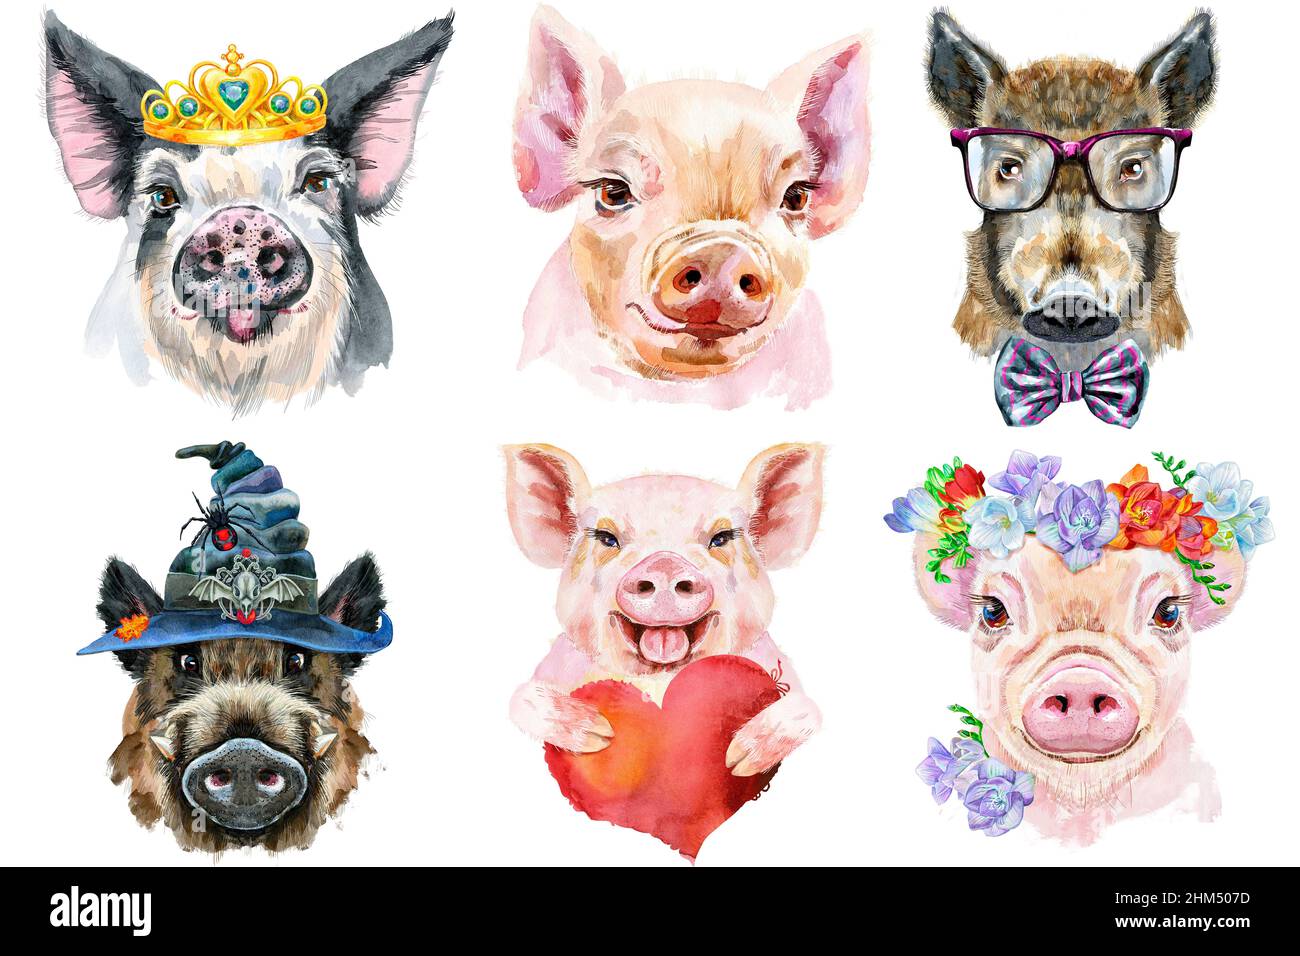 Watercolor illustration of pigs in wreath of peonies, glasses, witch hat, golden crown, with red heart Stock Photo